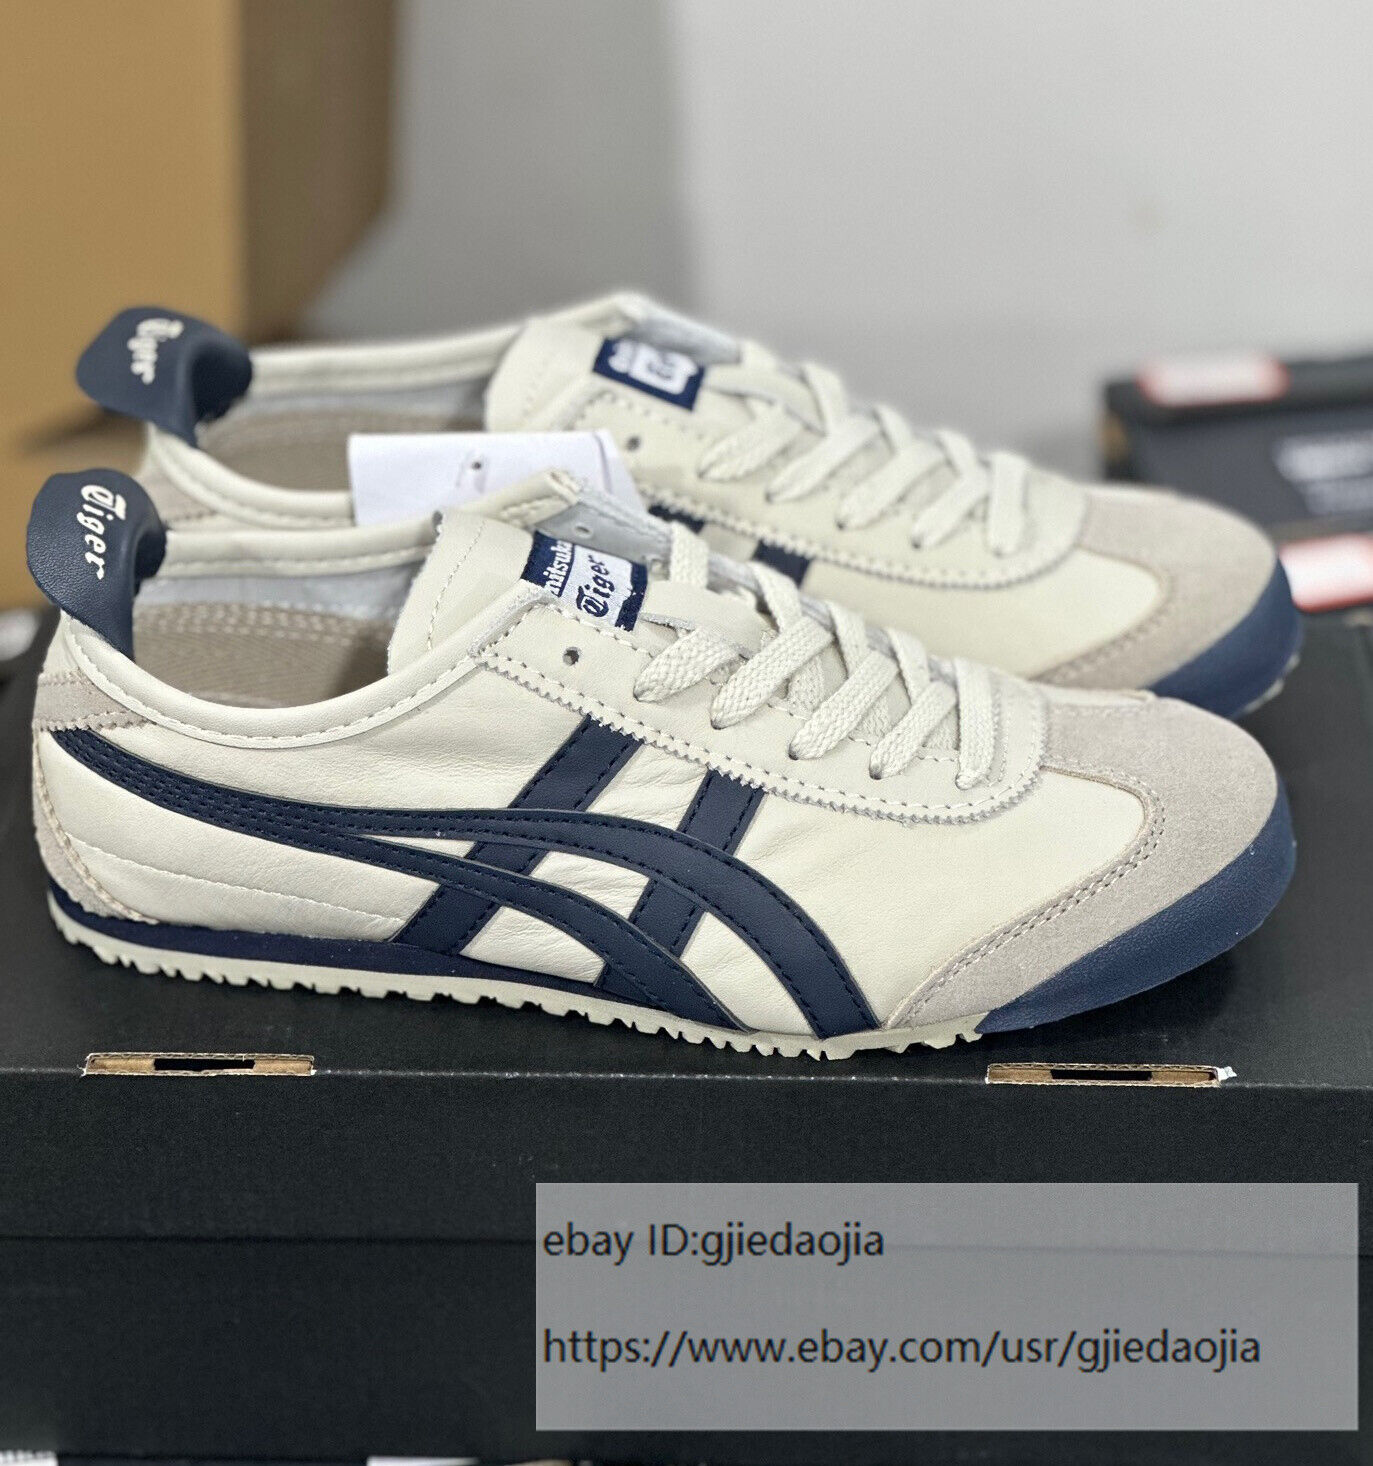 Onitsuka Tiger MEXICO 66 DL408-1659 Beige Navy Blue Unisex Classic Sneakers